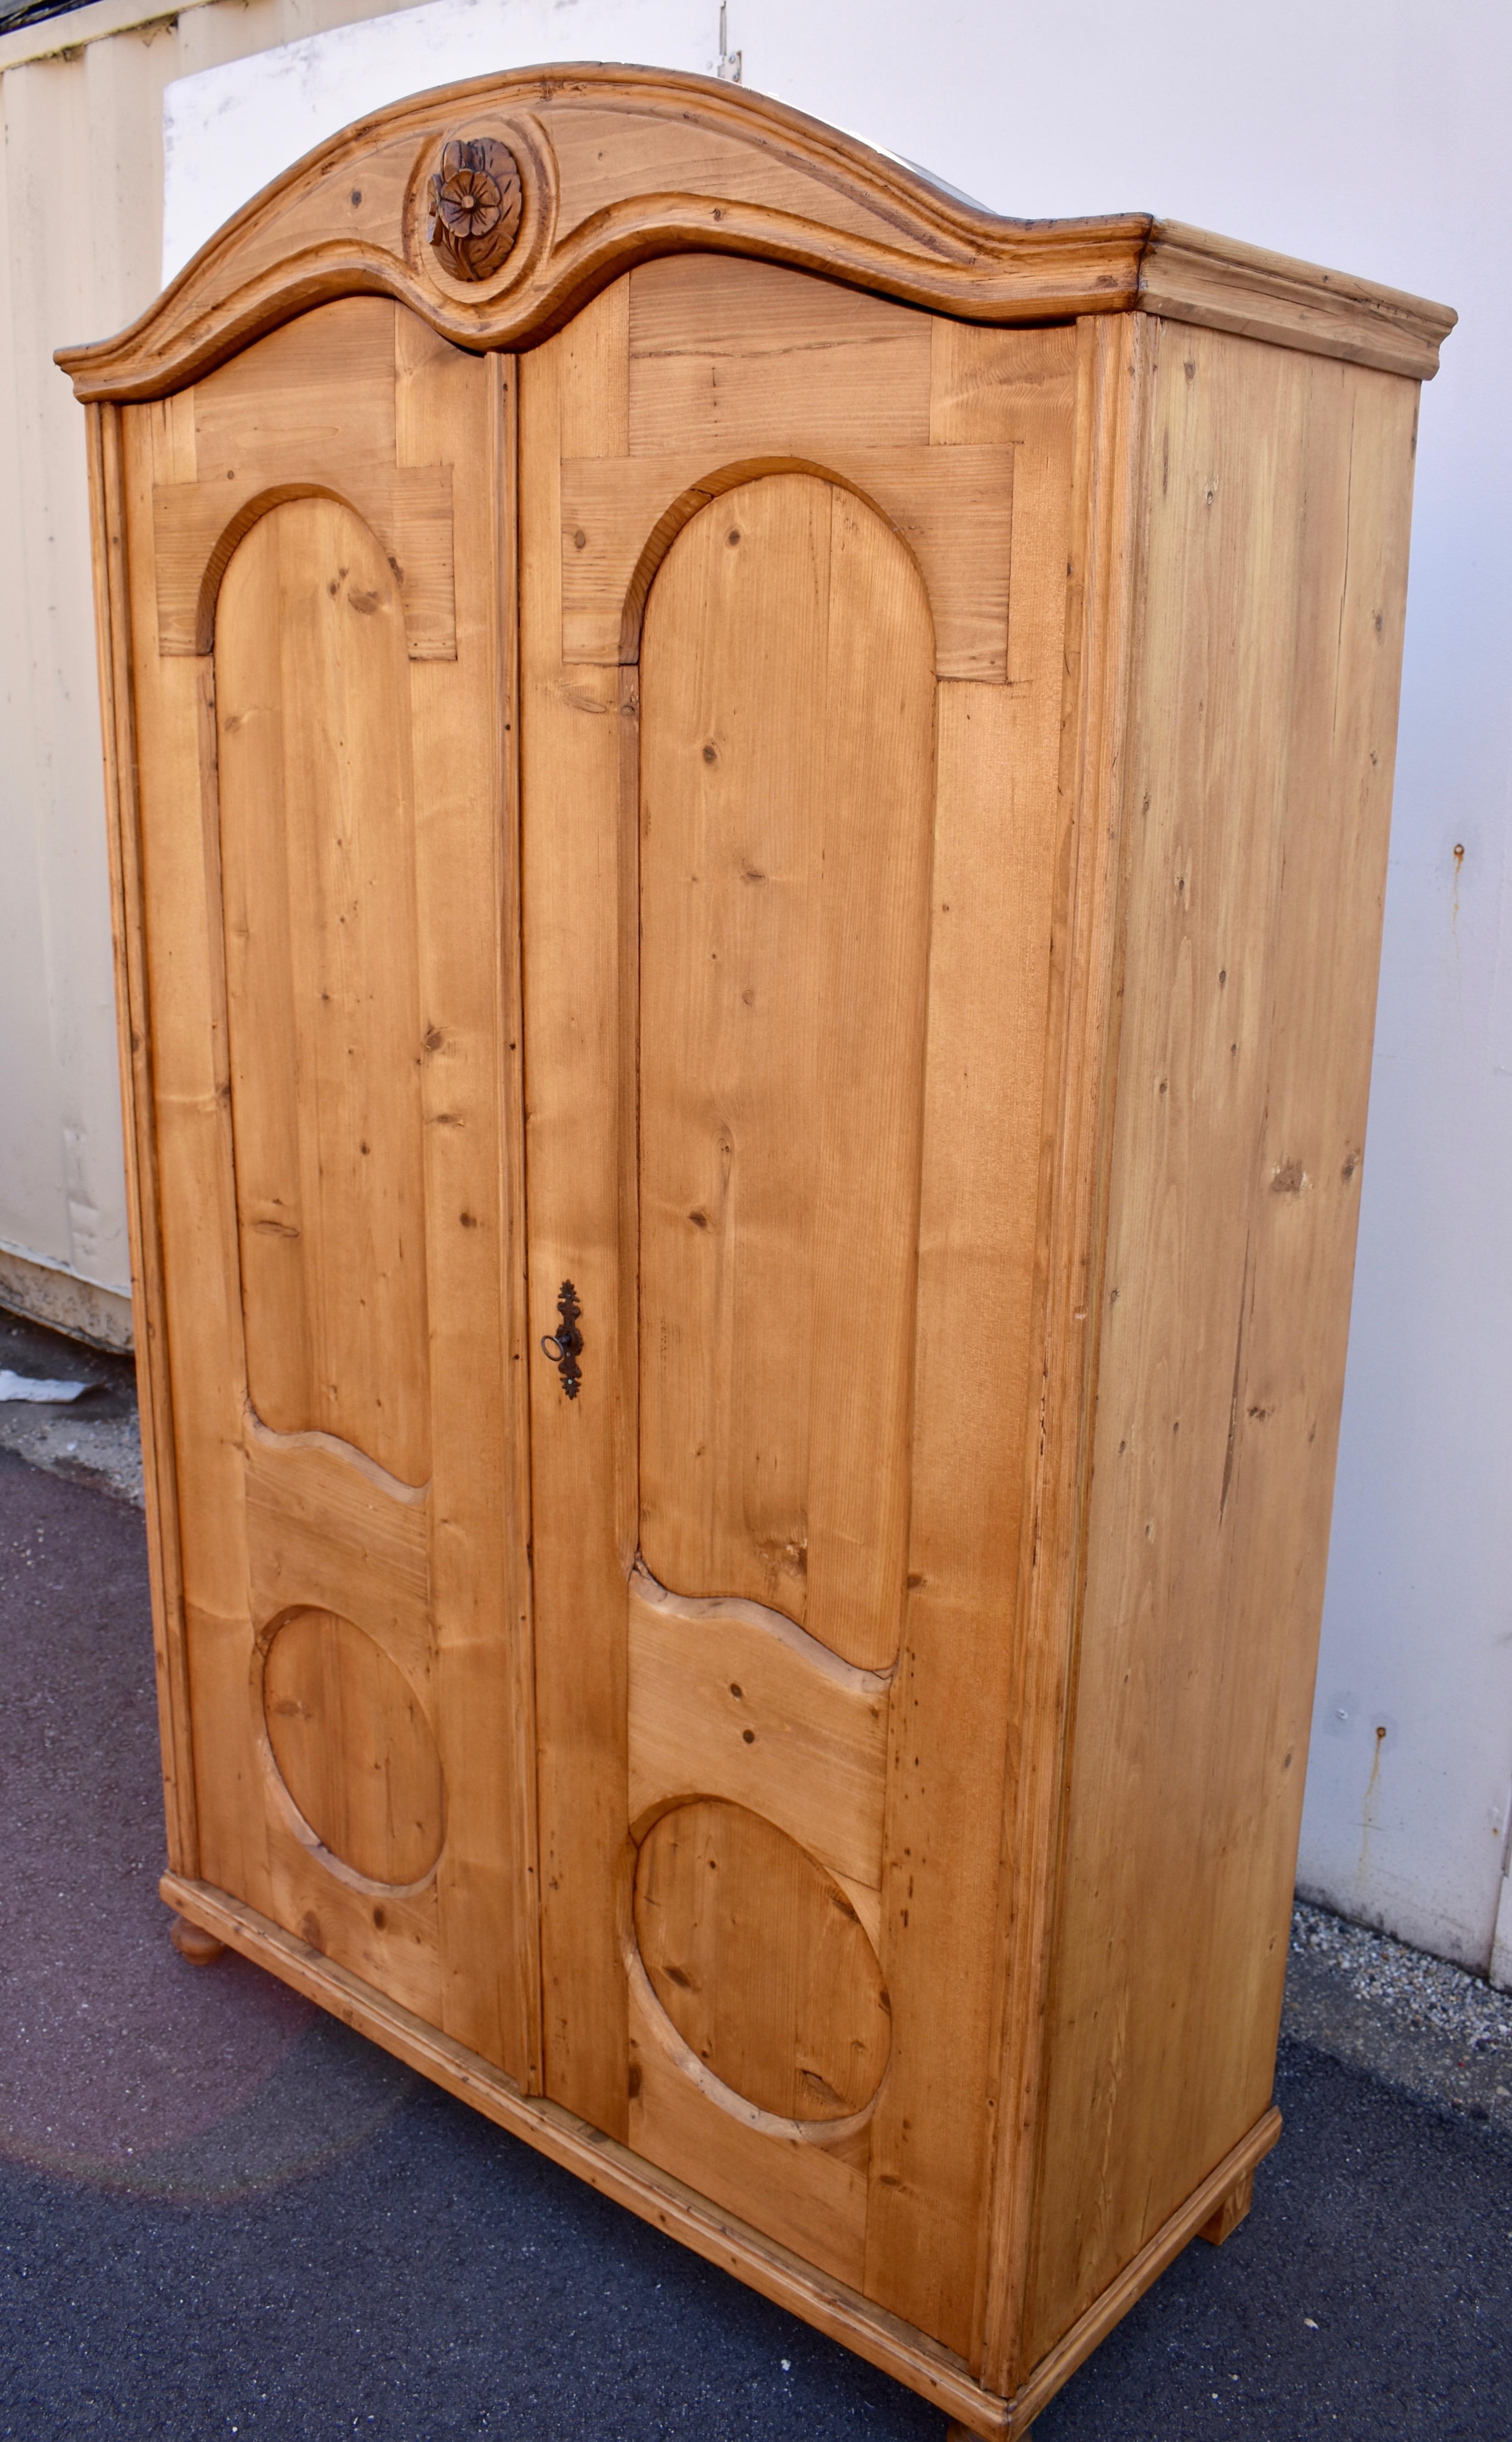 This is an interesting two door armoire with a very attractive form. The bonnet-top crown has a wonderful “swooping” line on top with a Queen Anne style double arch beneath.  In the center of the crown is mounted an applied carved hardwood floral